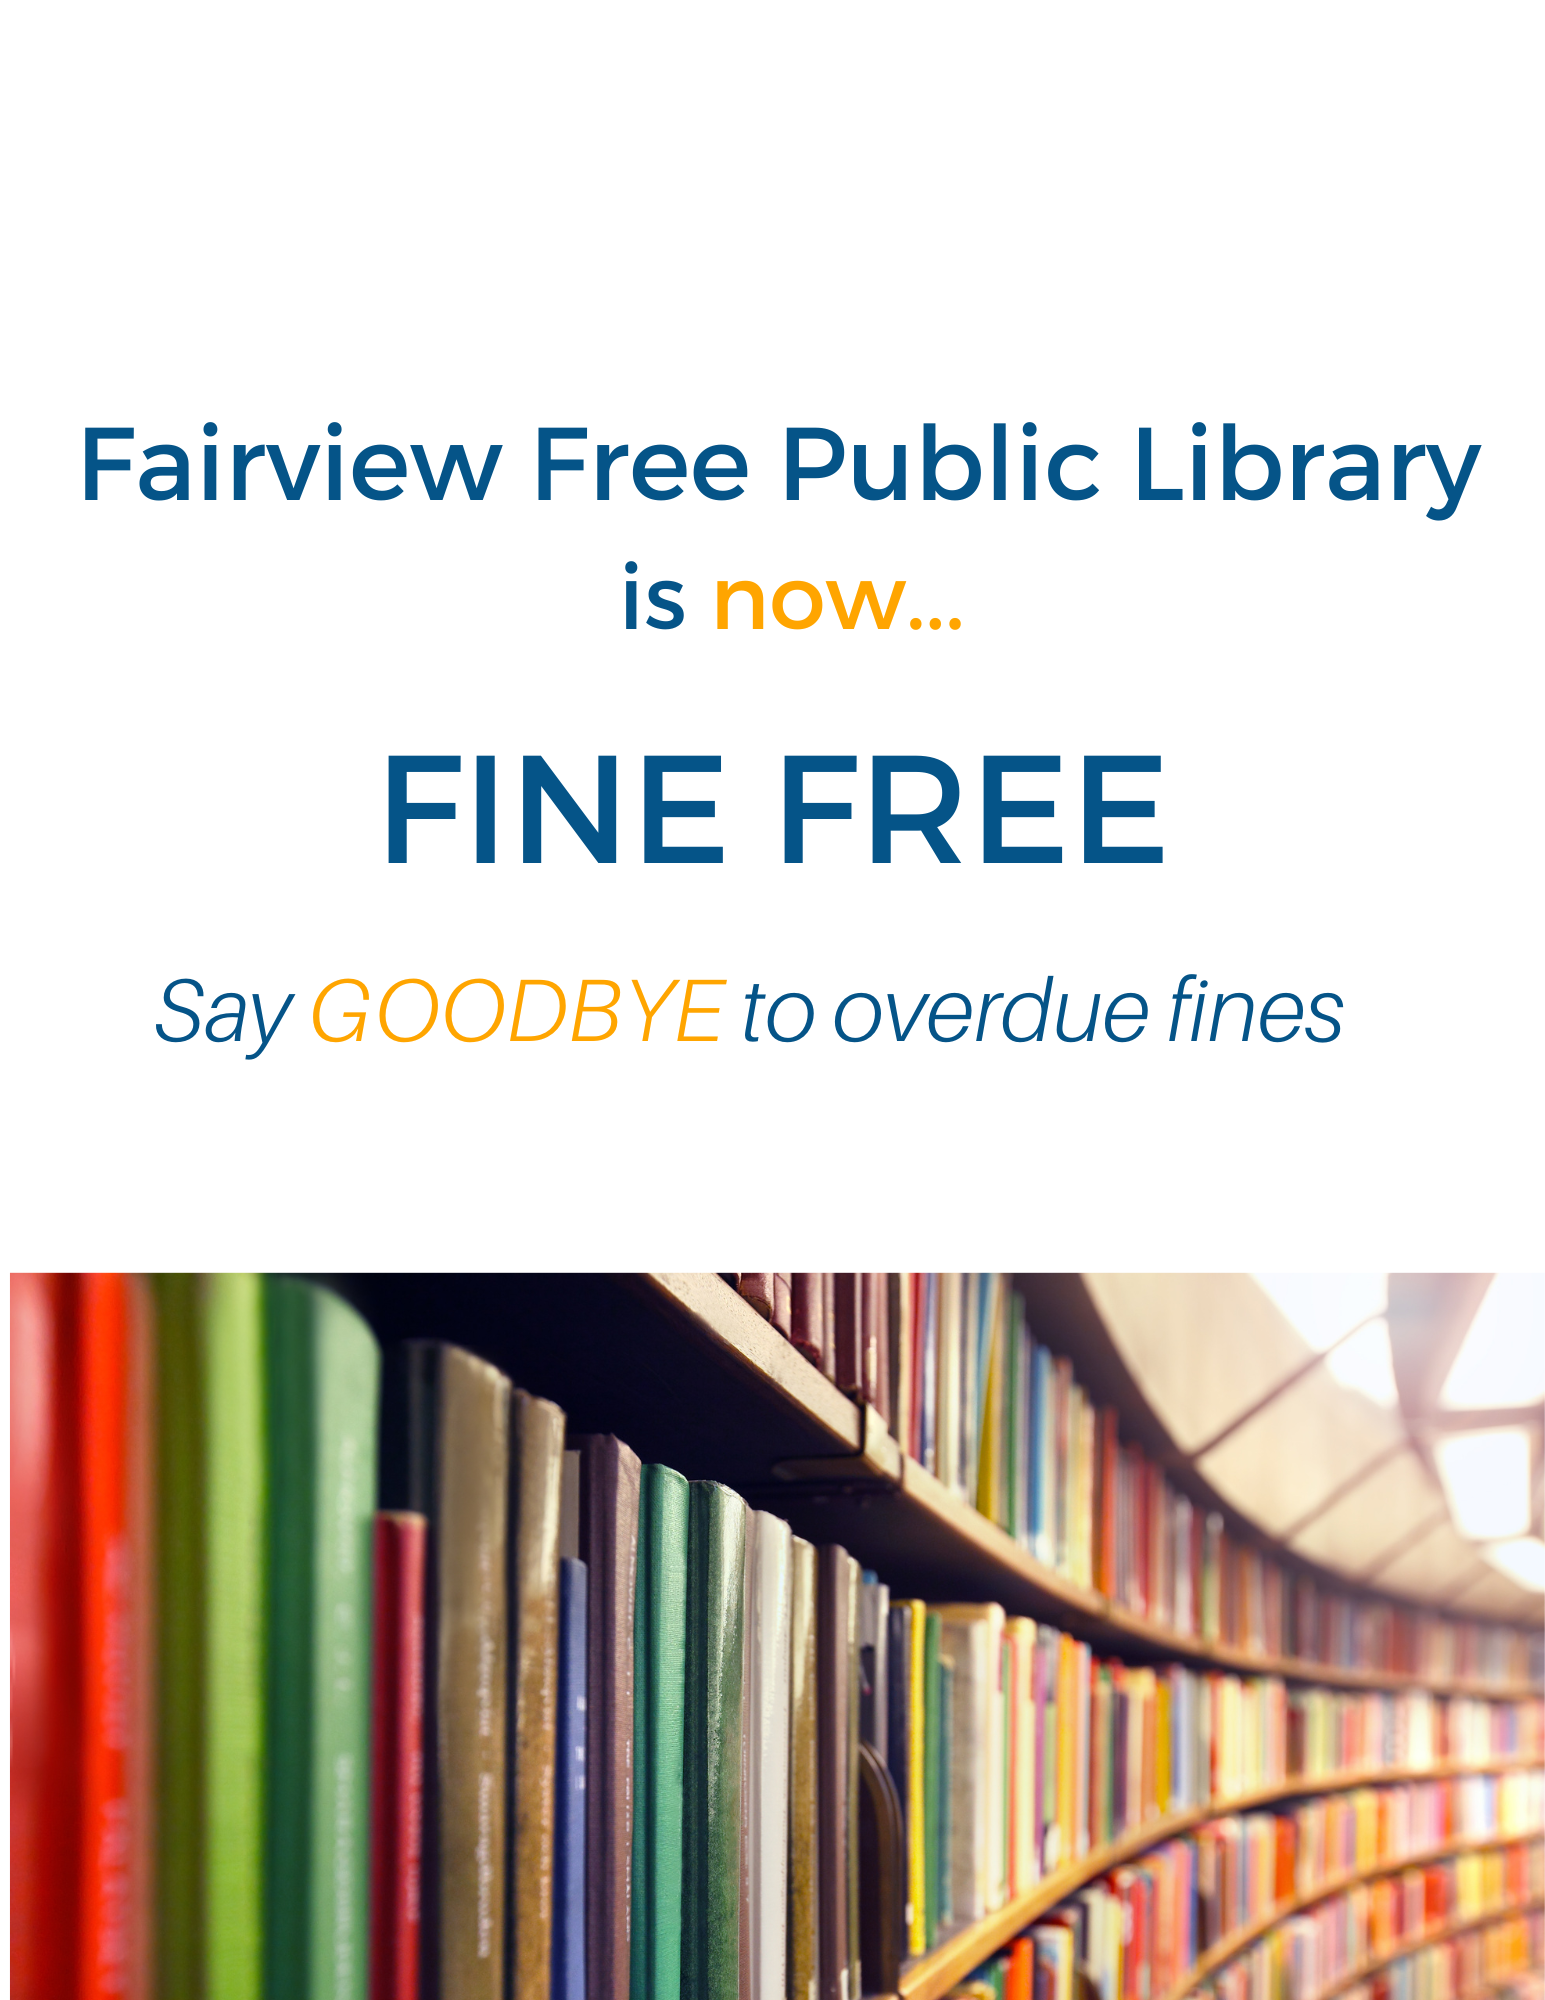 THE FAIRVIEW FREE PUBLIC LIBRARY IS FINE FREE